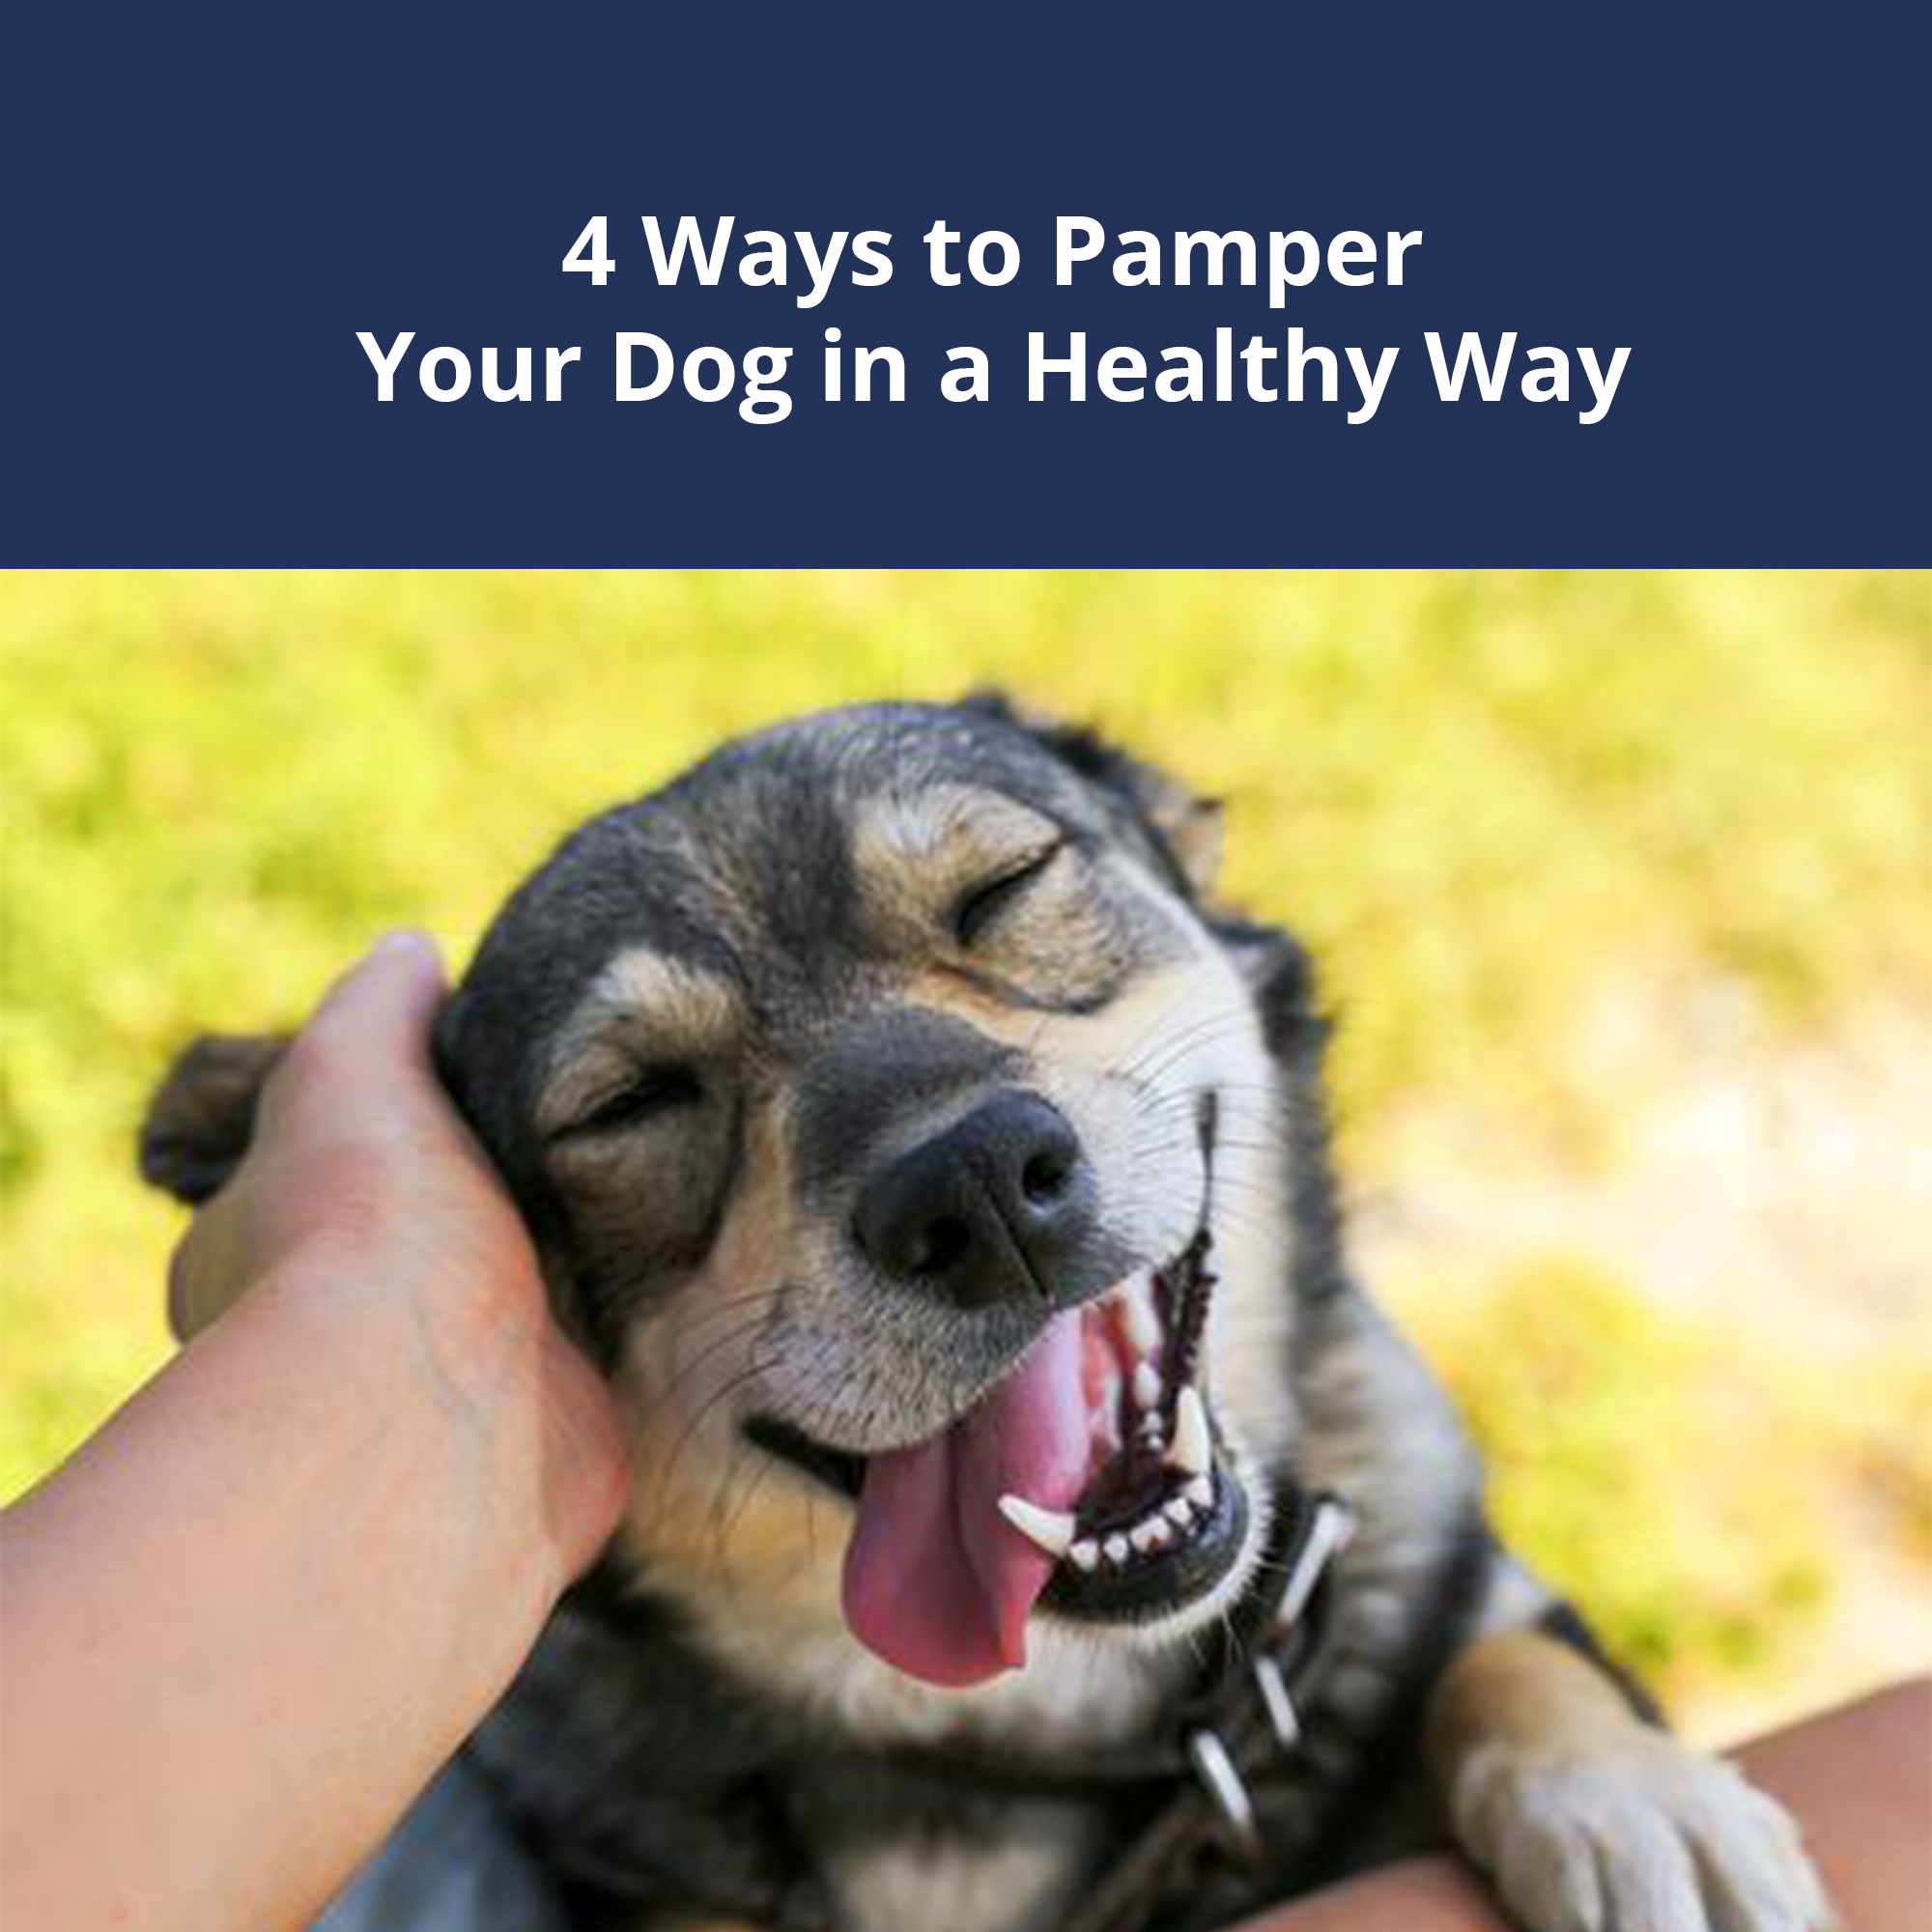 Pamper Your Dog in a Healthy Way